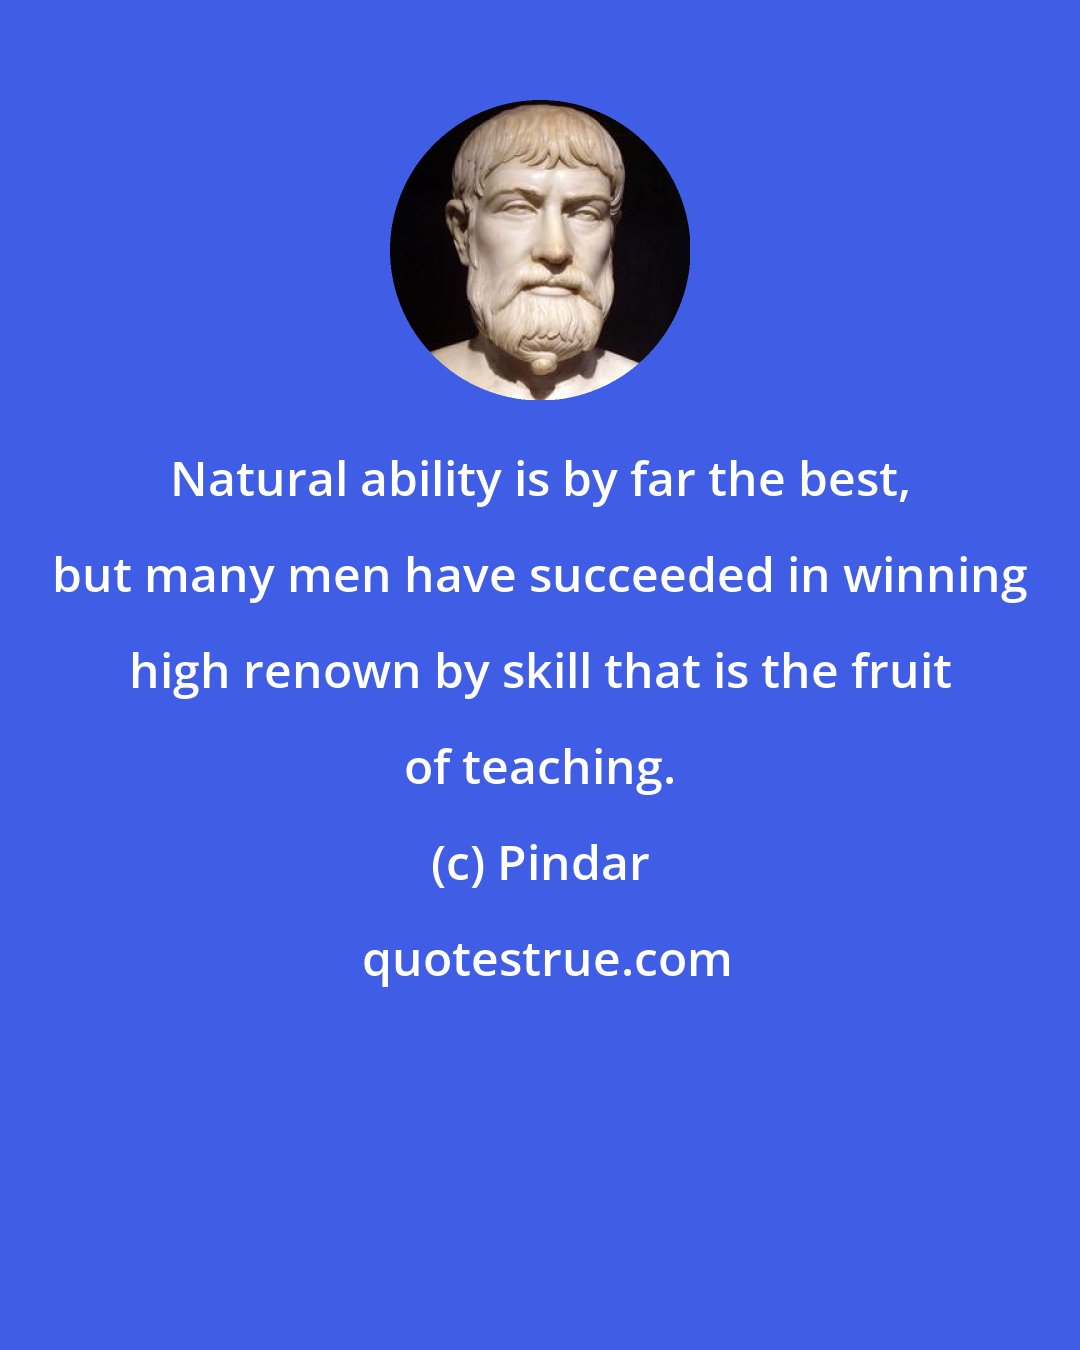 Pindar: Natural ability is by far the best, but many men have succeeded in winning high renown by skill that is the fruit of teaching.